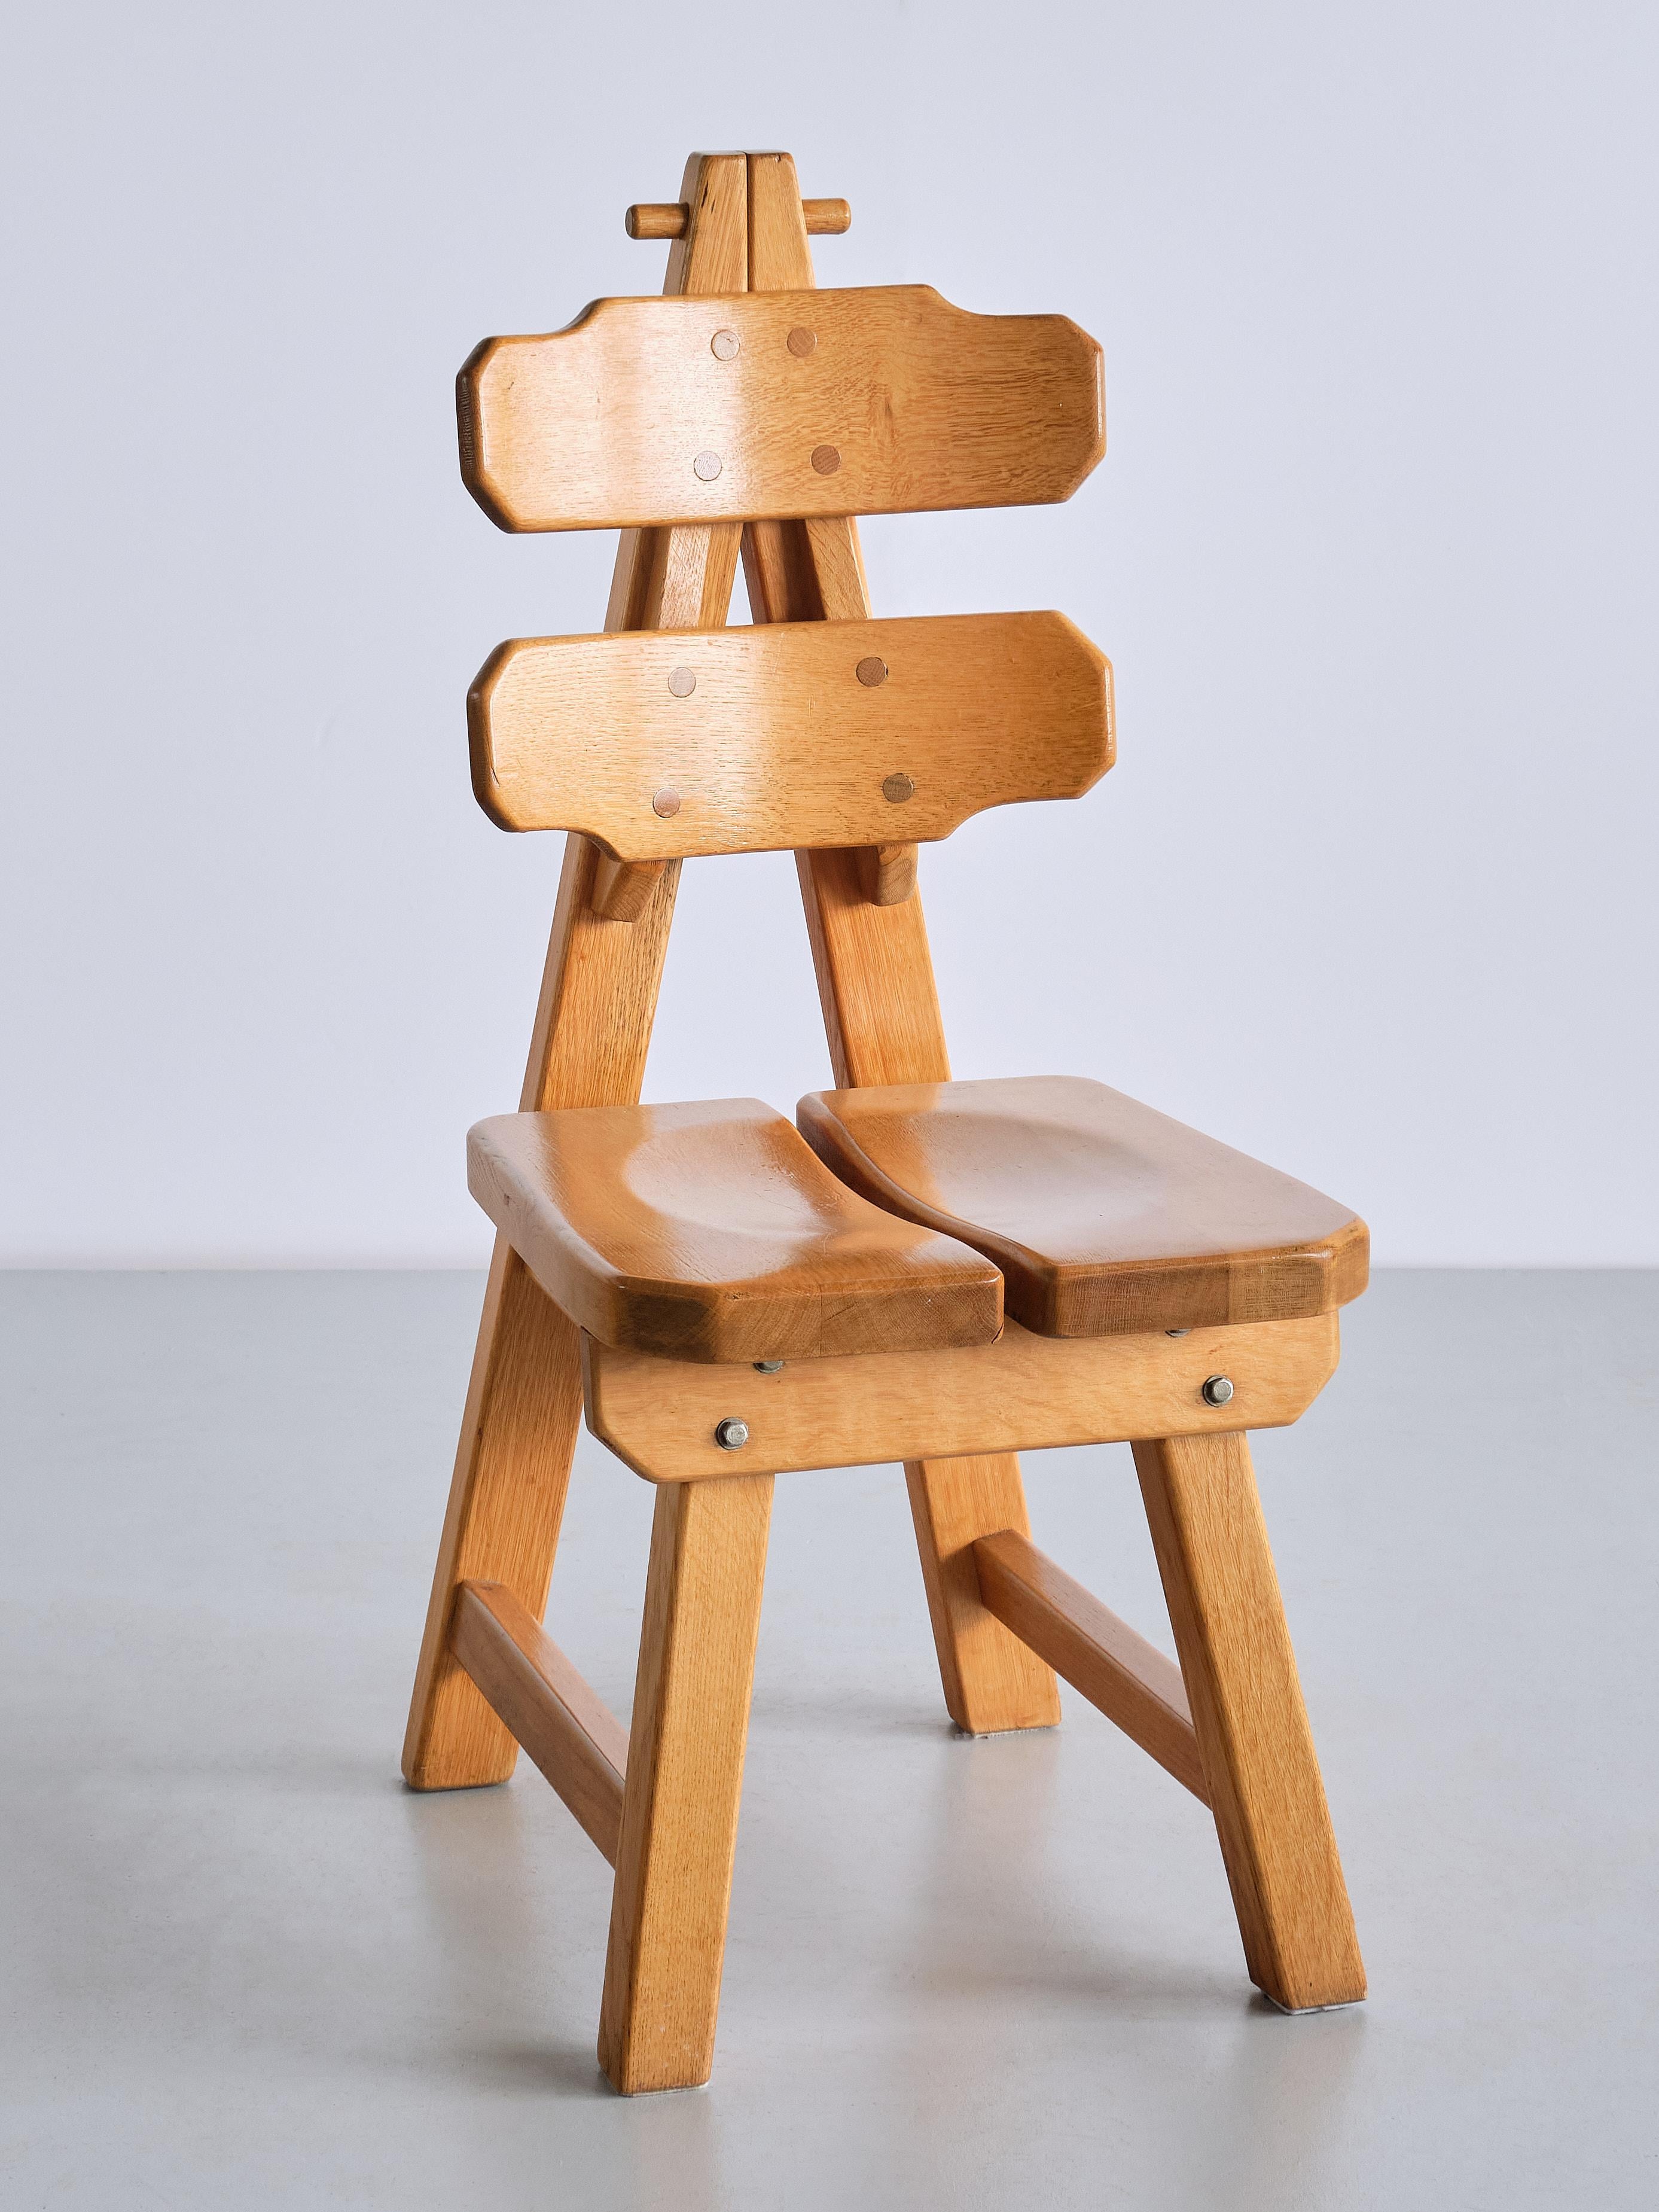 Sculptural Set of Six Brutalist Dining Chairs in Solid Oak, France, 1960s For Sale 2